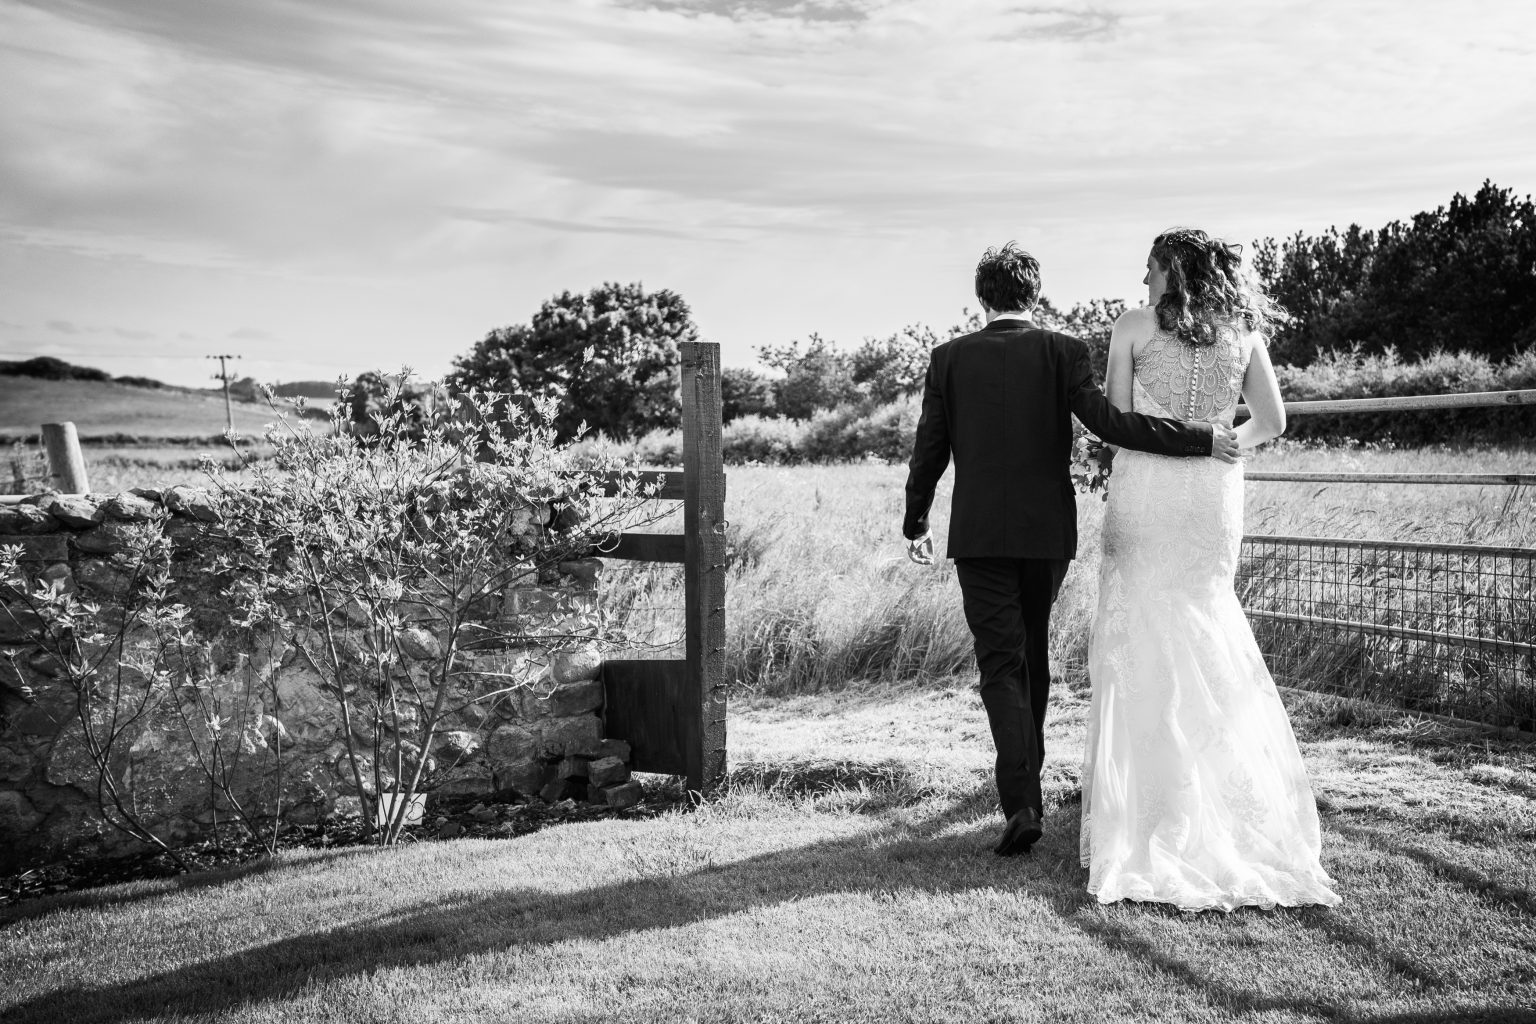 hull wedding photographer captures a bride and groom casually walking through a field